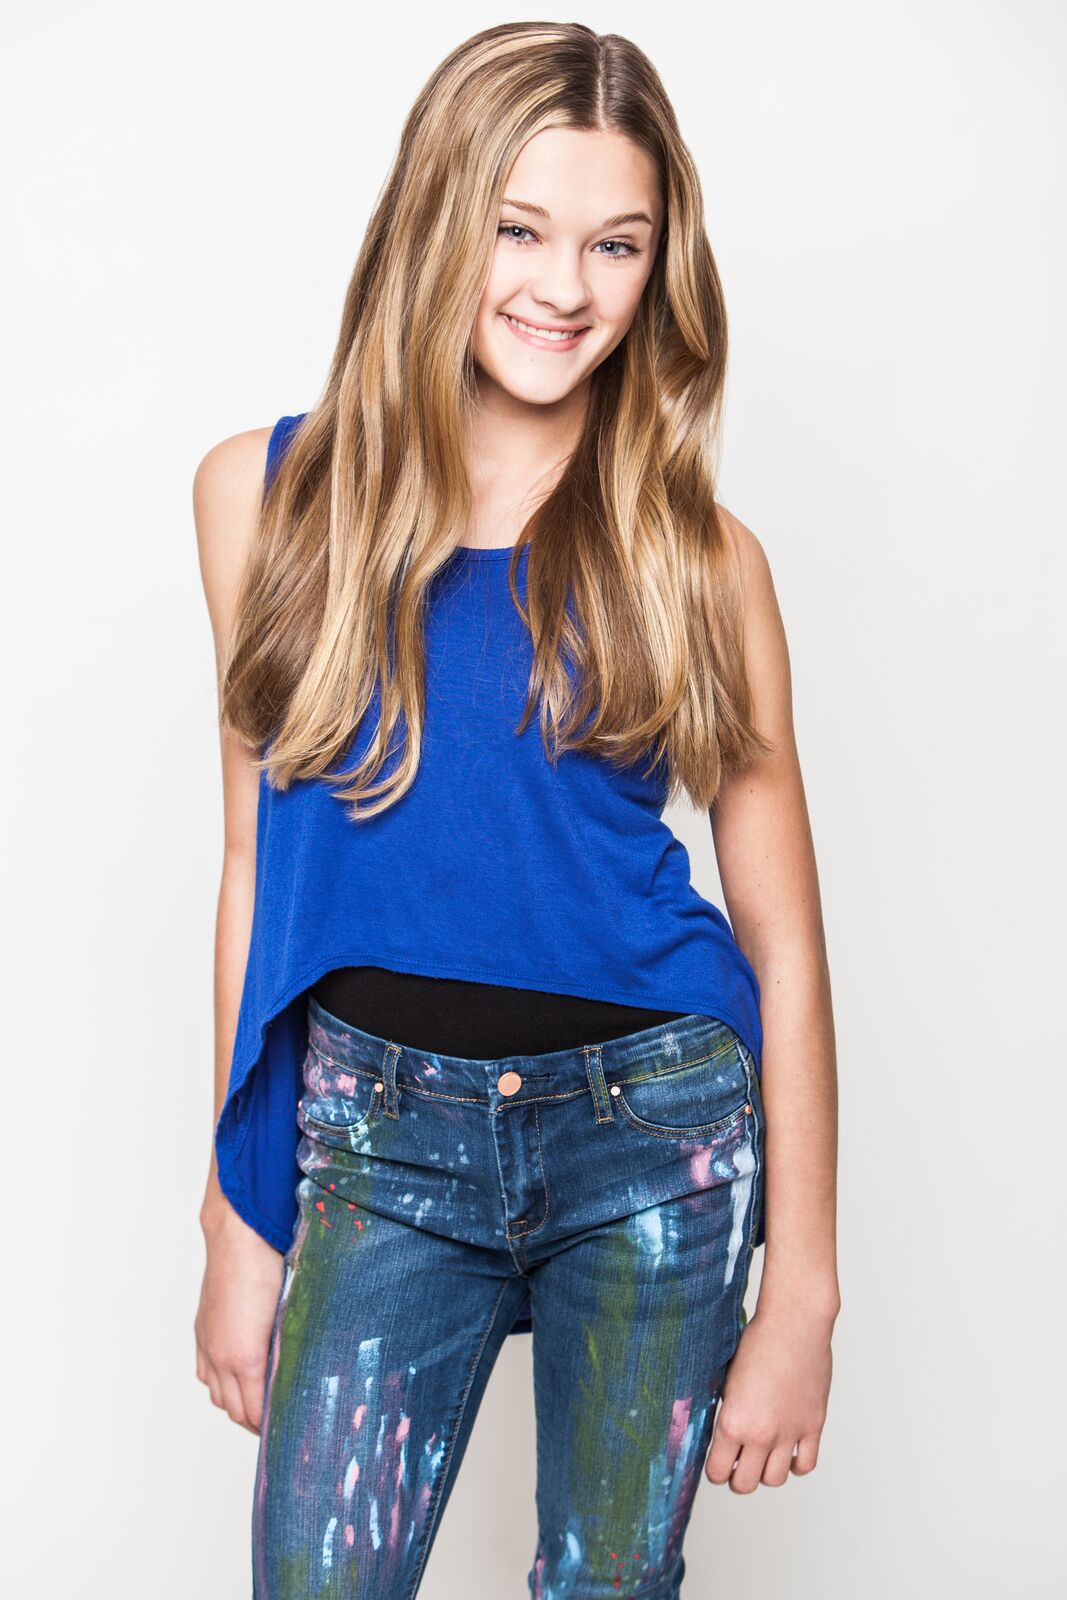 Lizzy Greene Dishes On ‘nicky Ricky Dicky And Dawn